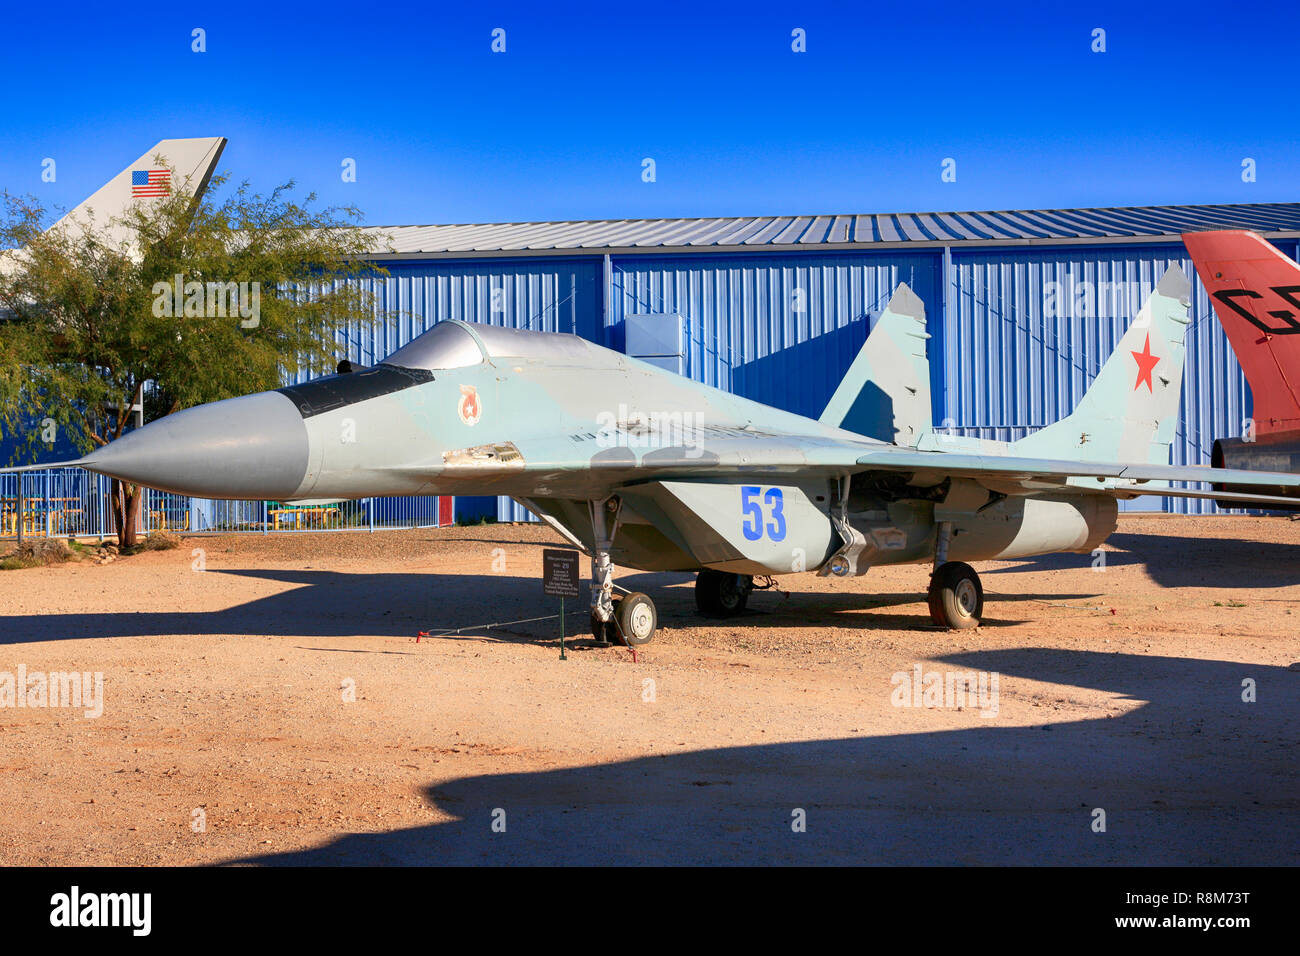 Russian Mig-29 "Fulcrum" 1980s jet fighter plane on display at the Pima Air & Space Museum in Tucson, AZ Stock Photo